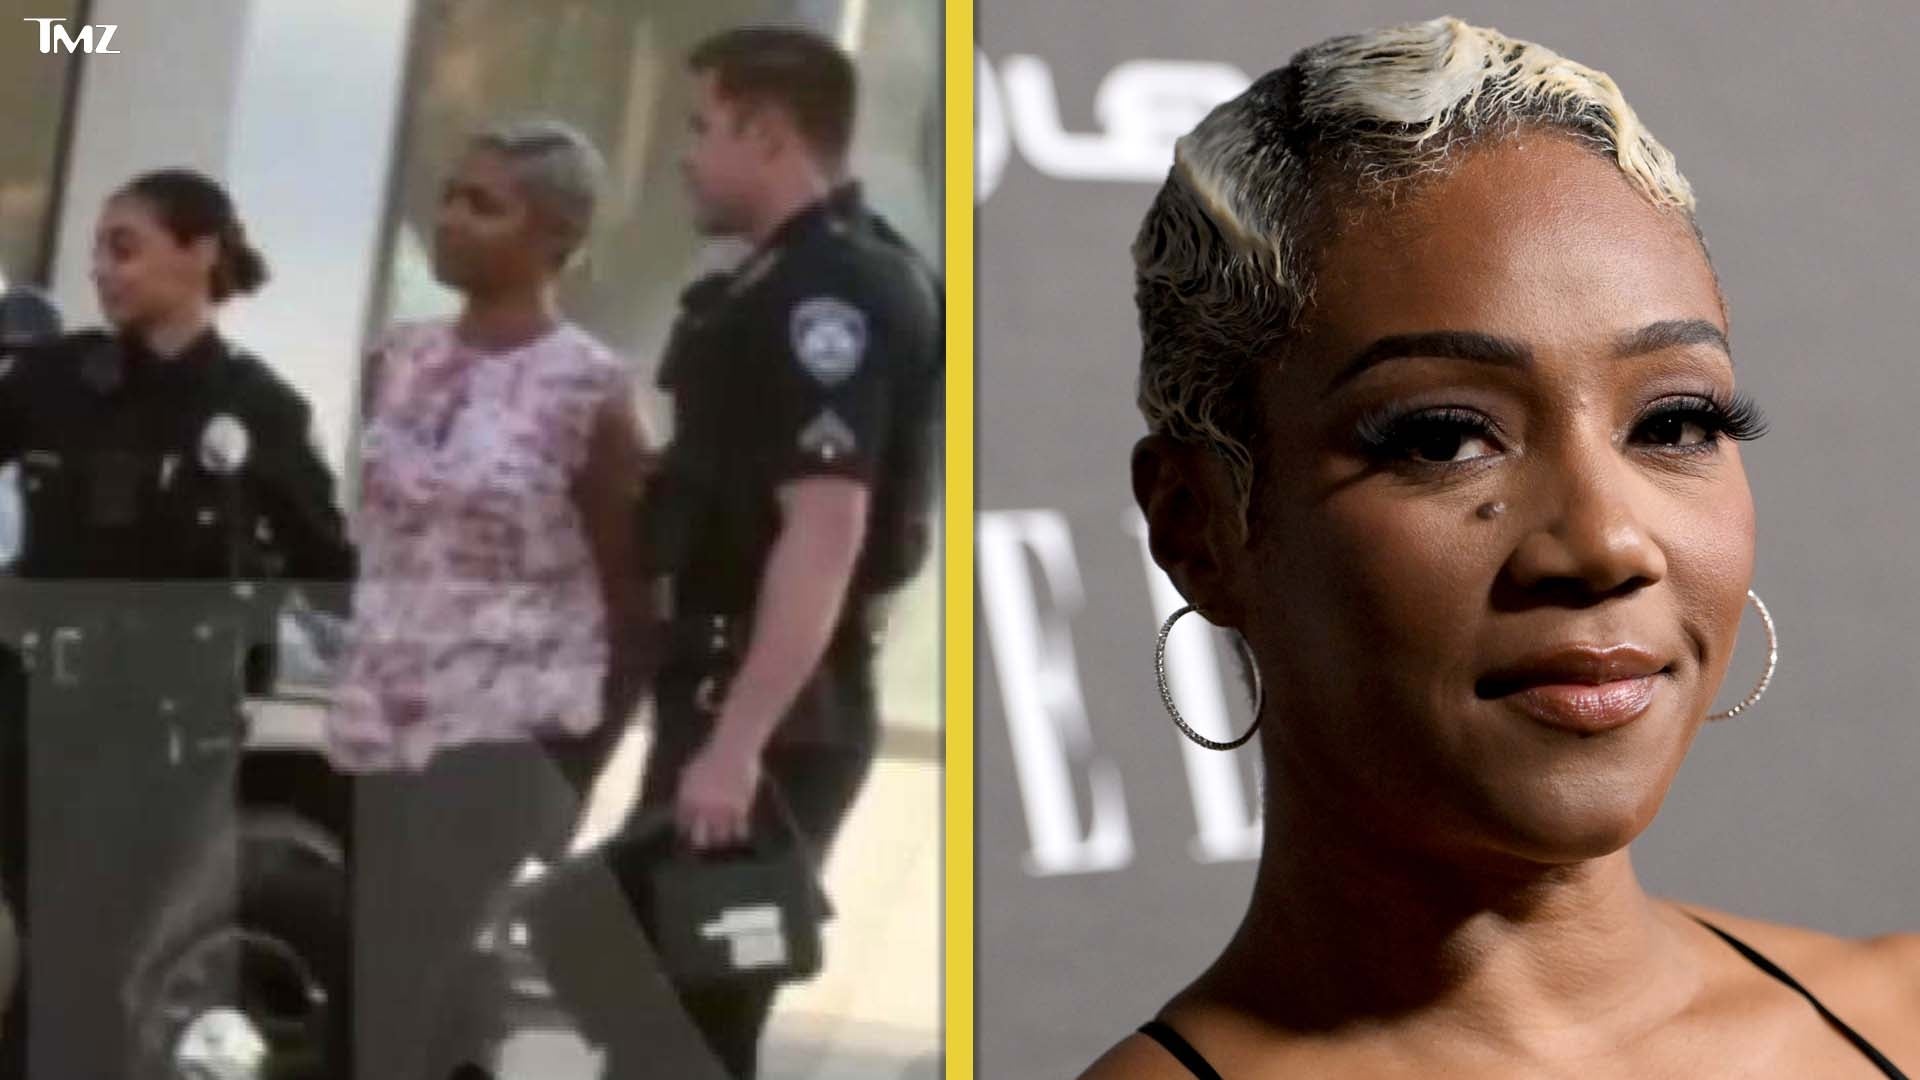 Tiffany Haddish Says She'll 'Get Some Help' After Second DUI Arrest (Exclusive)